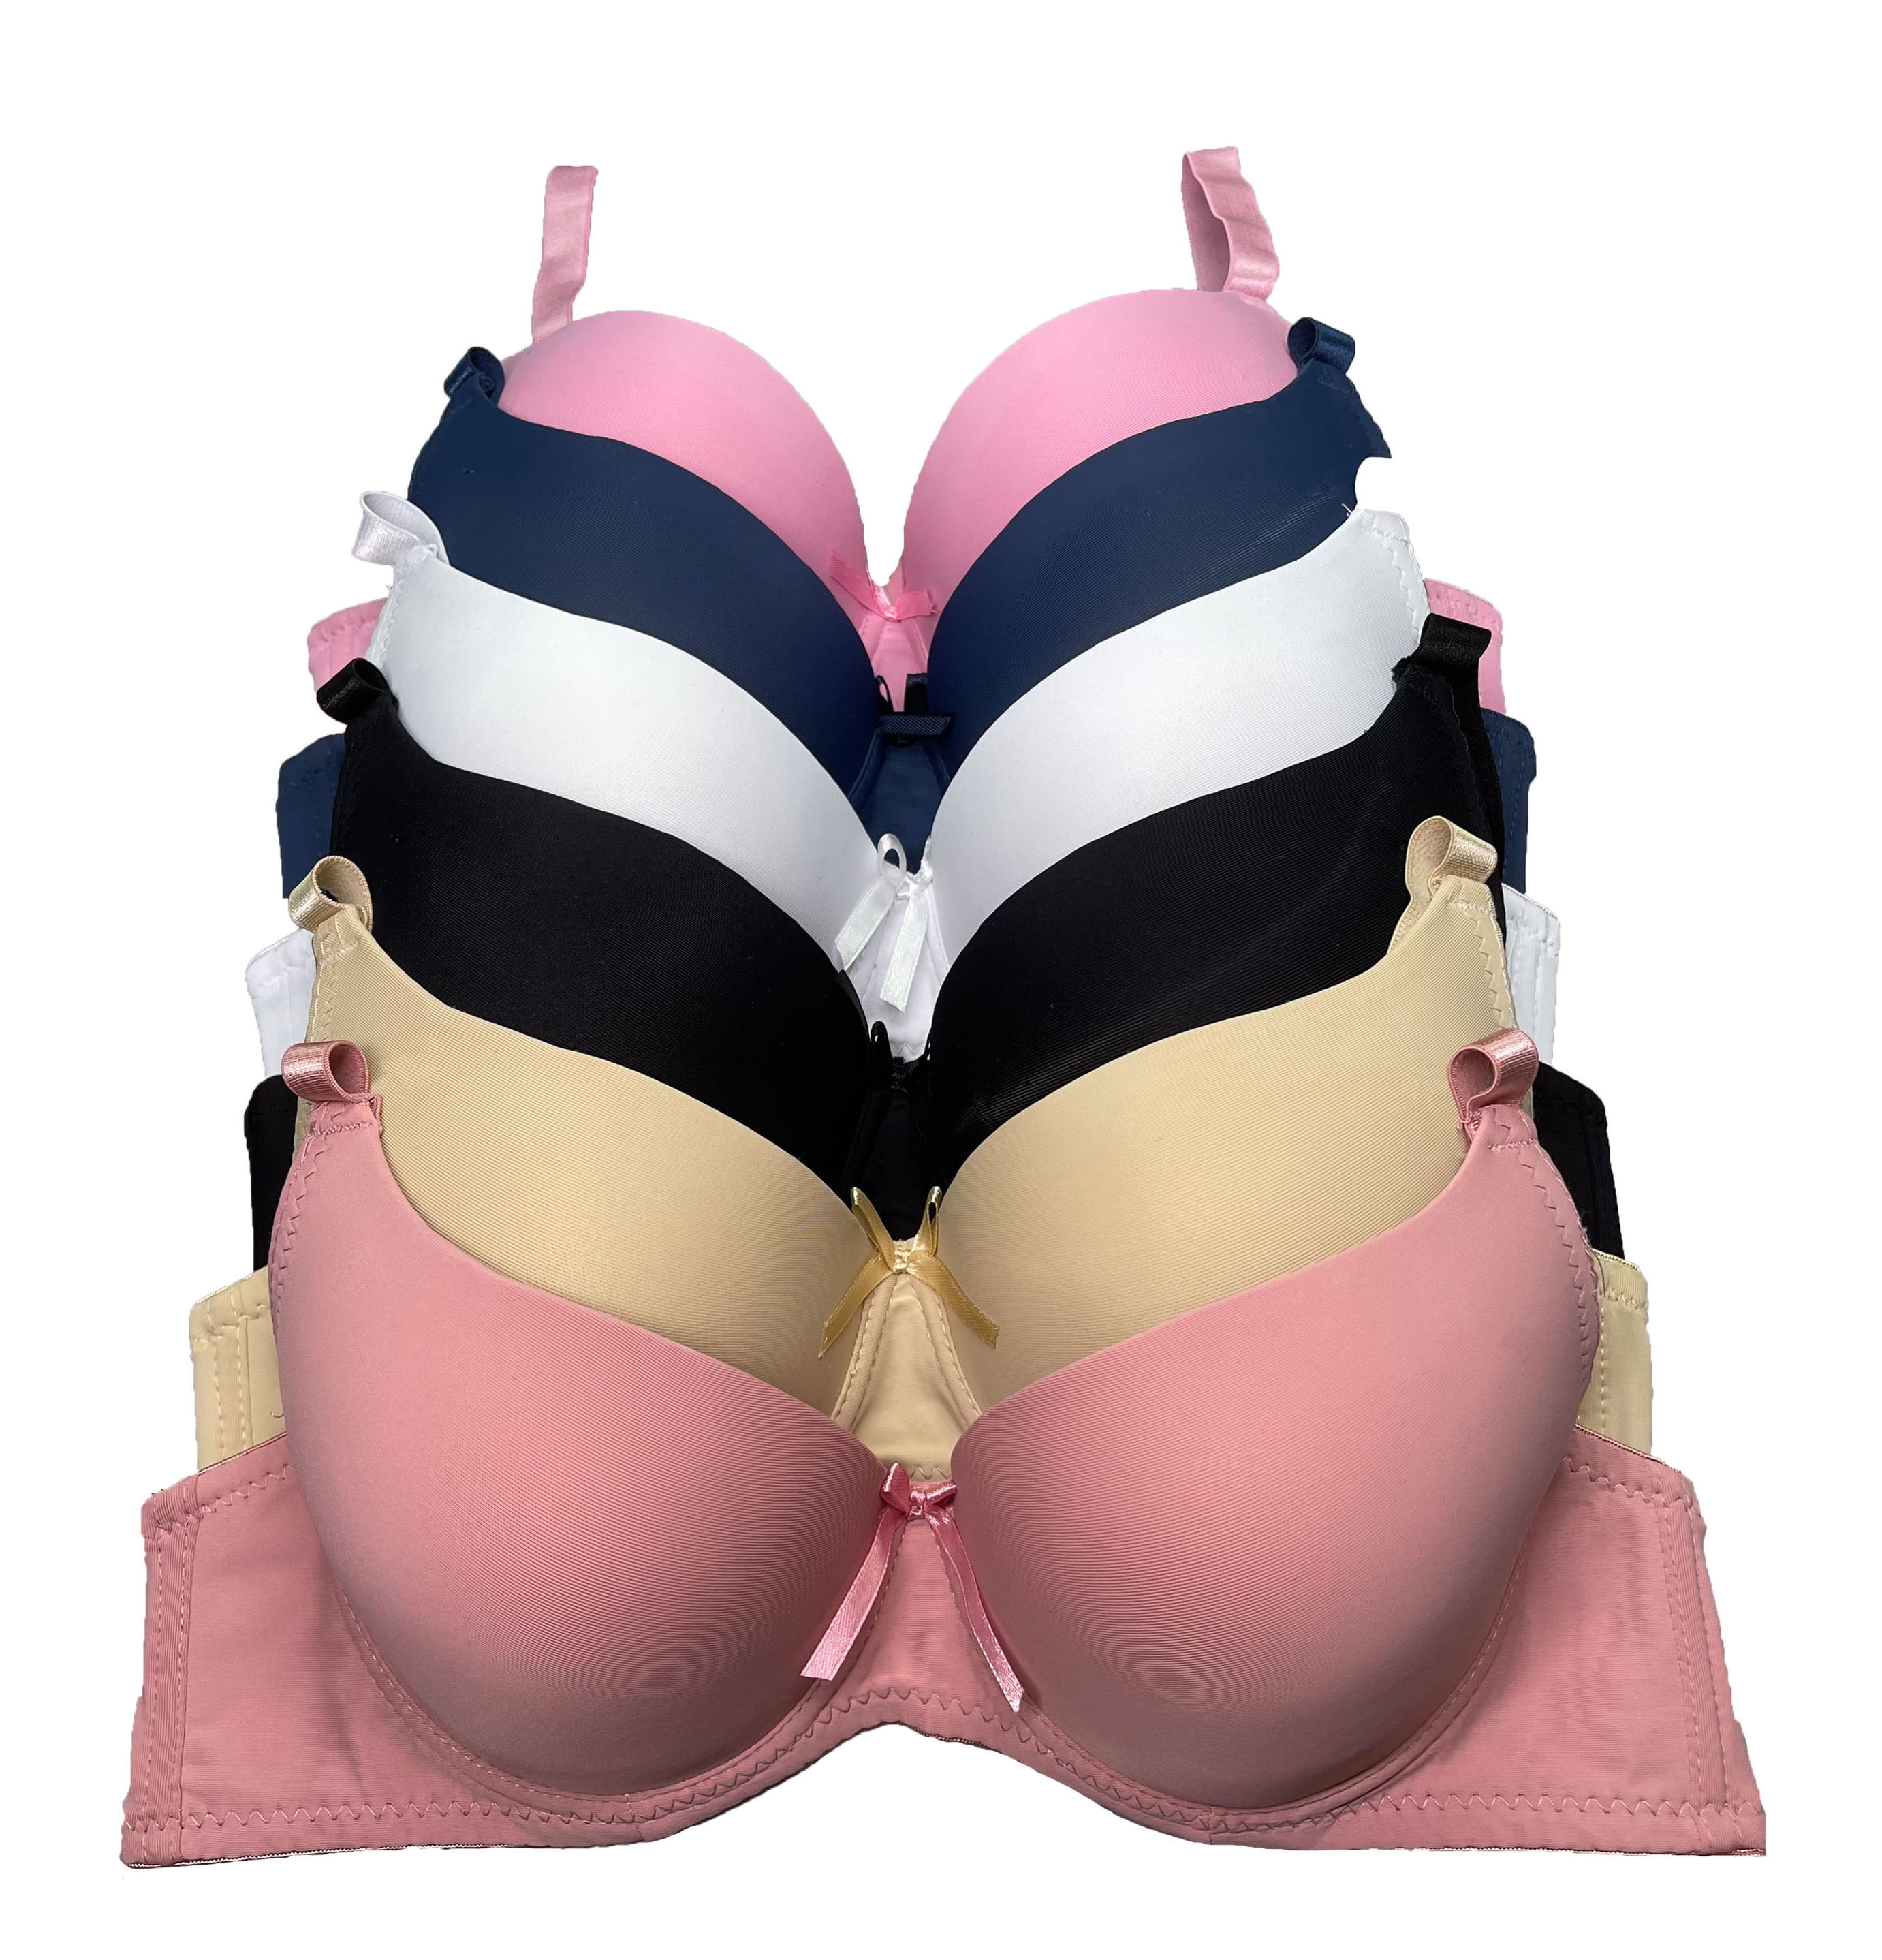 Women Bras 6 Pack of T-shirt Bra B Cup C Cup D Cup DD Cup DDD Cup 40DD  (8226) 